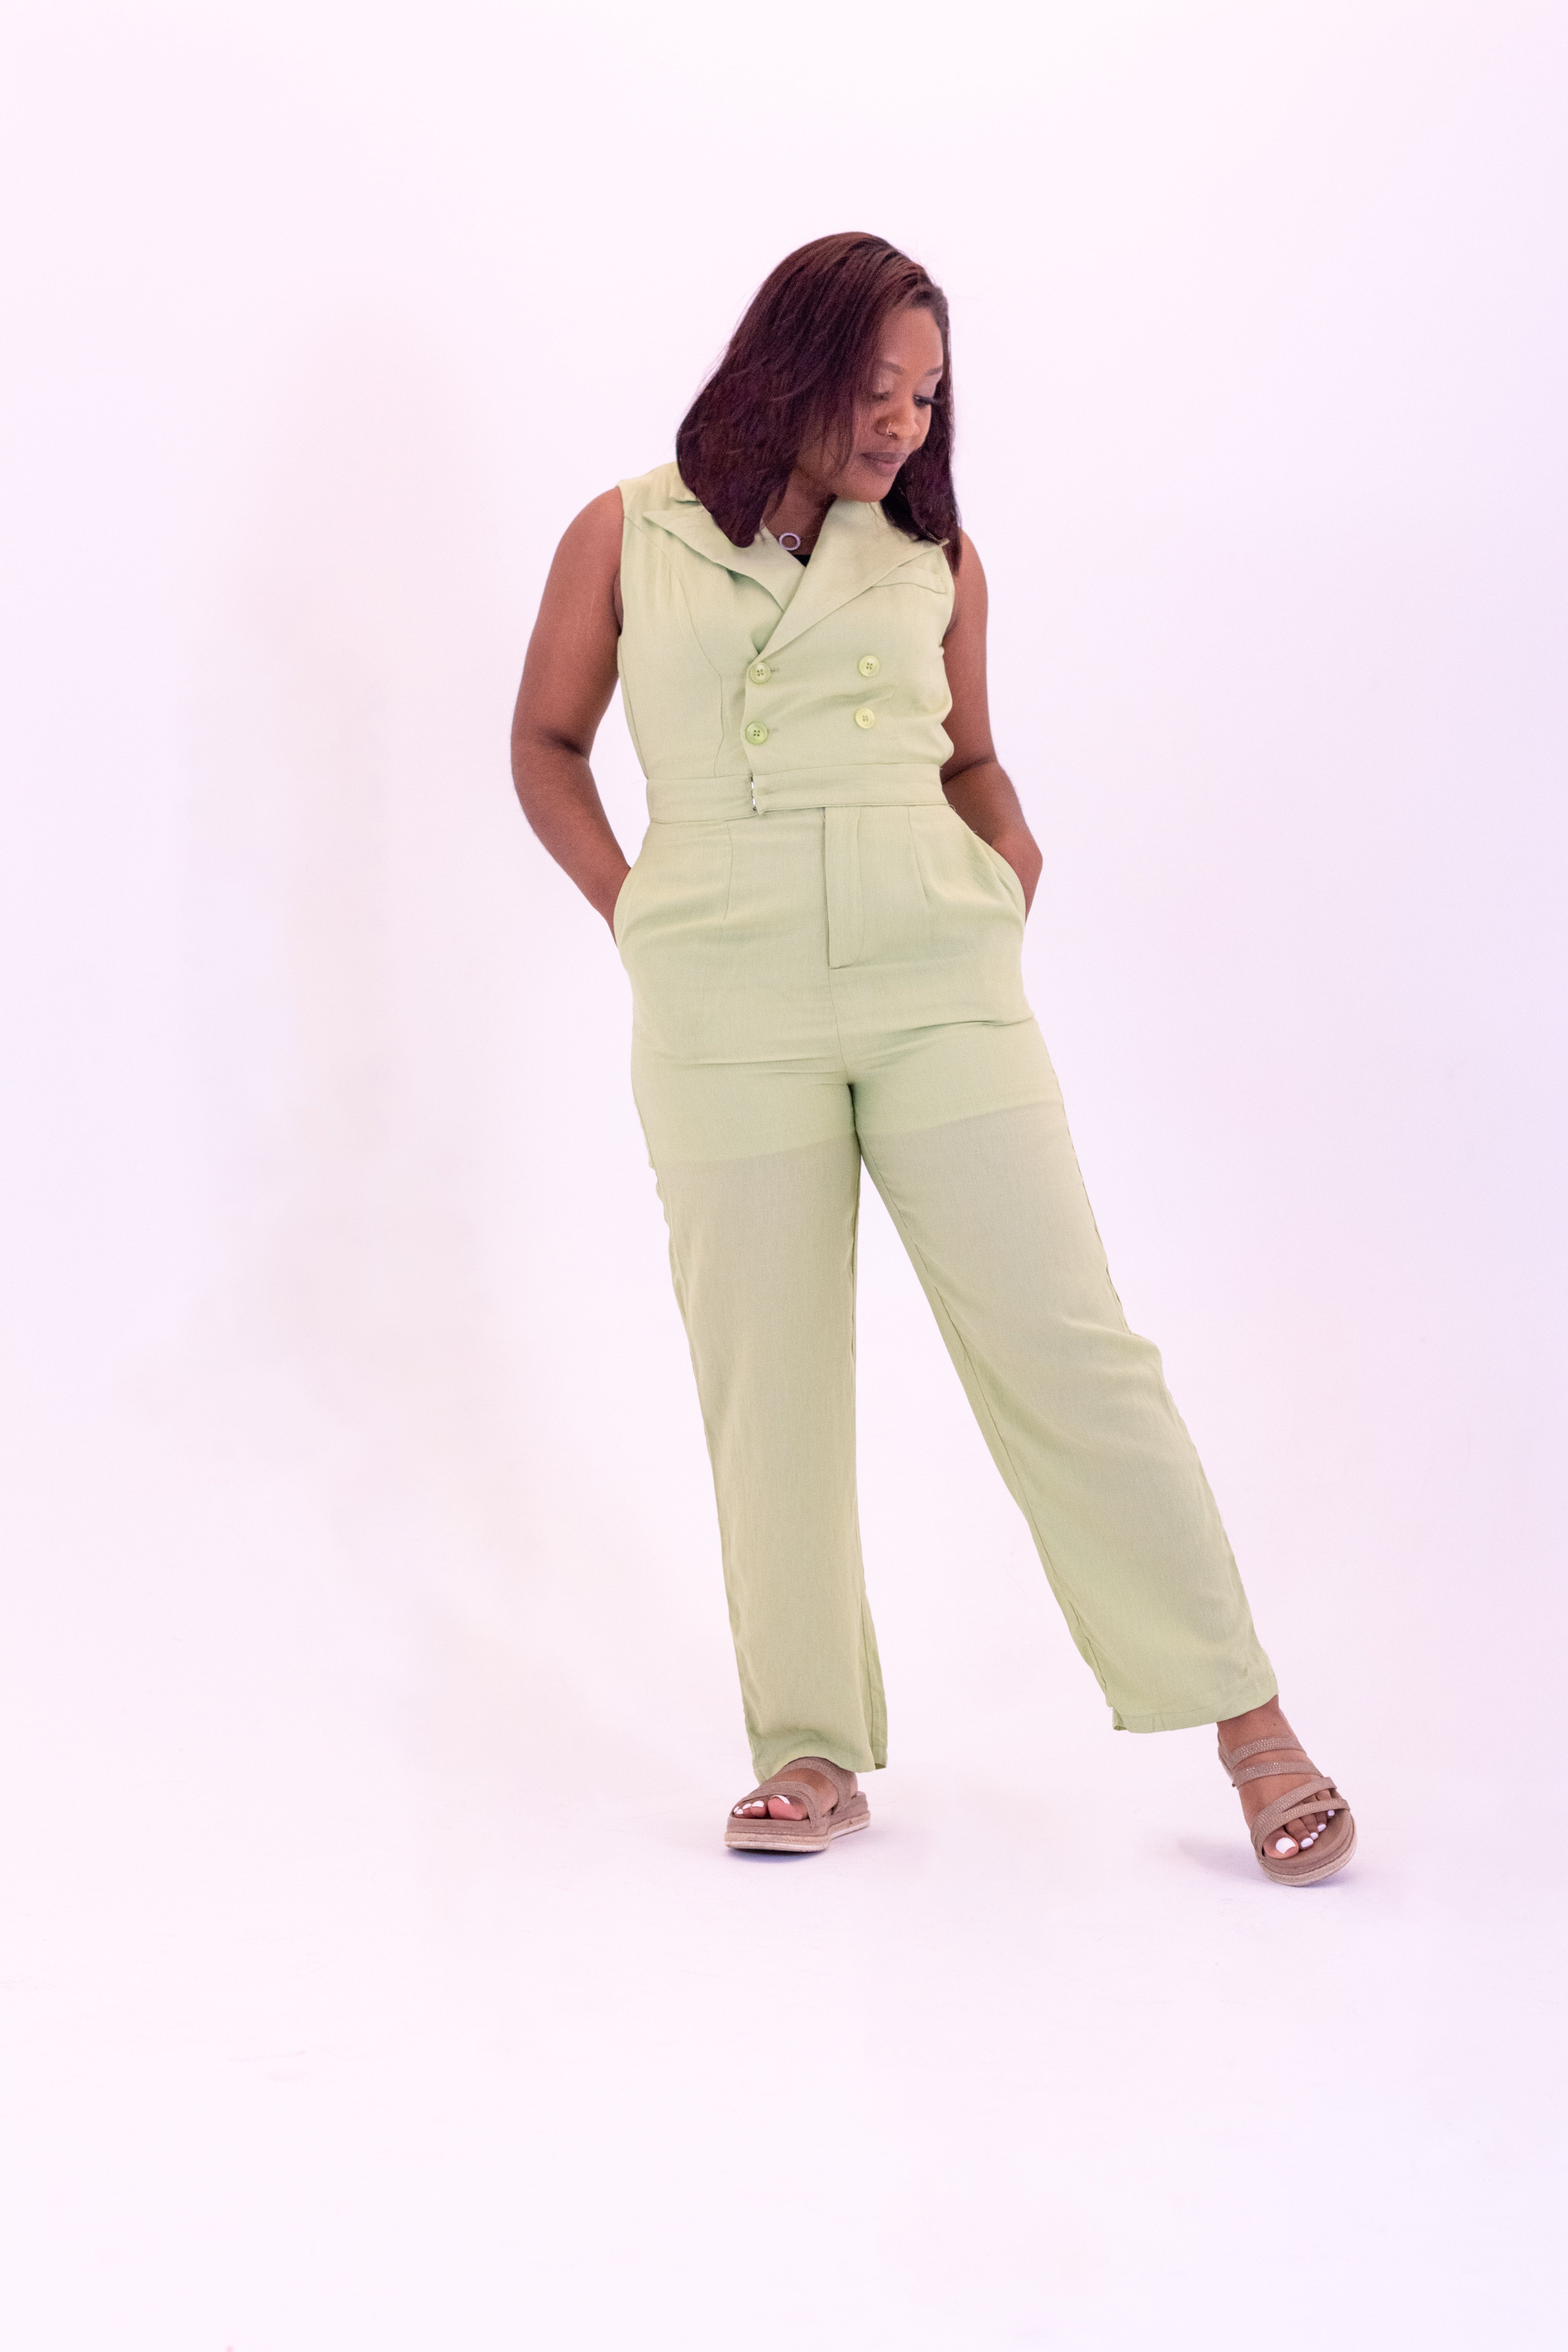 Women's green jumpsuit with pockets